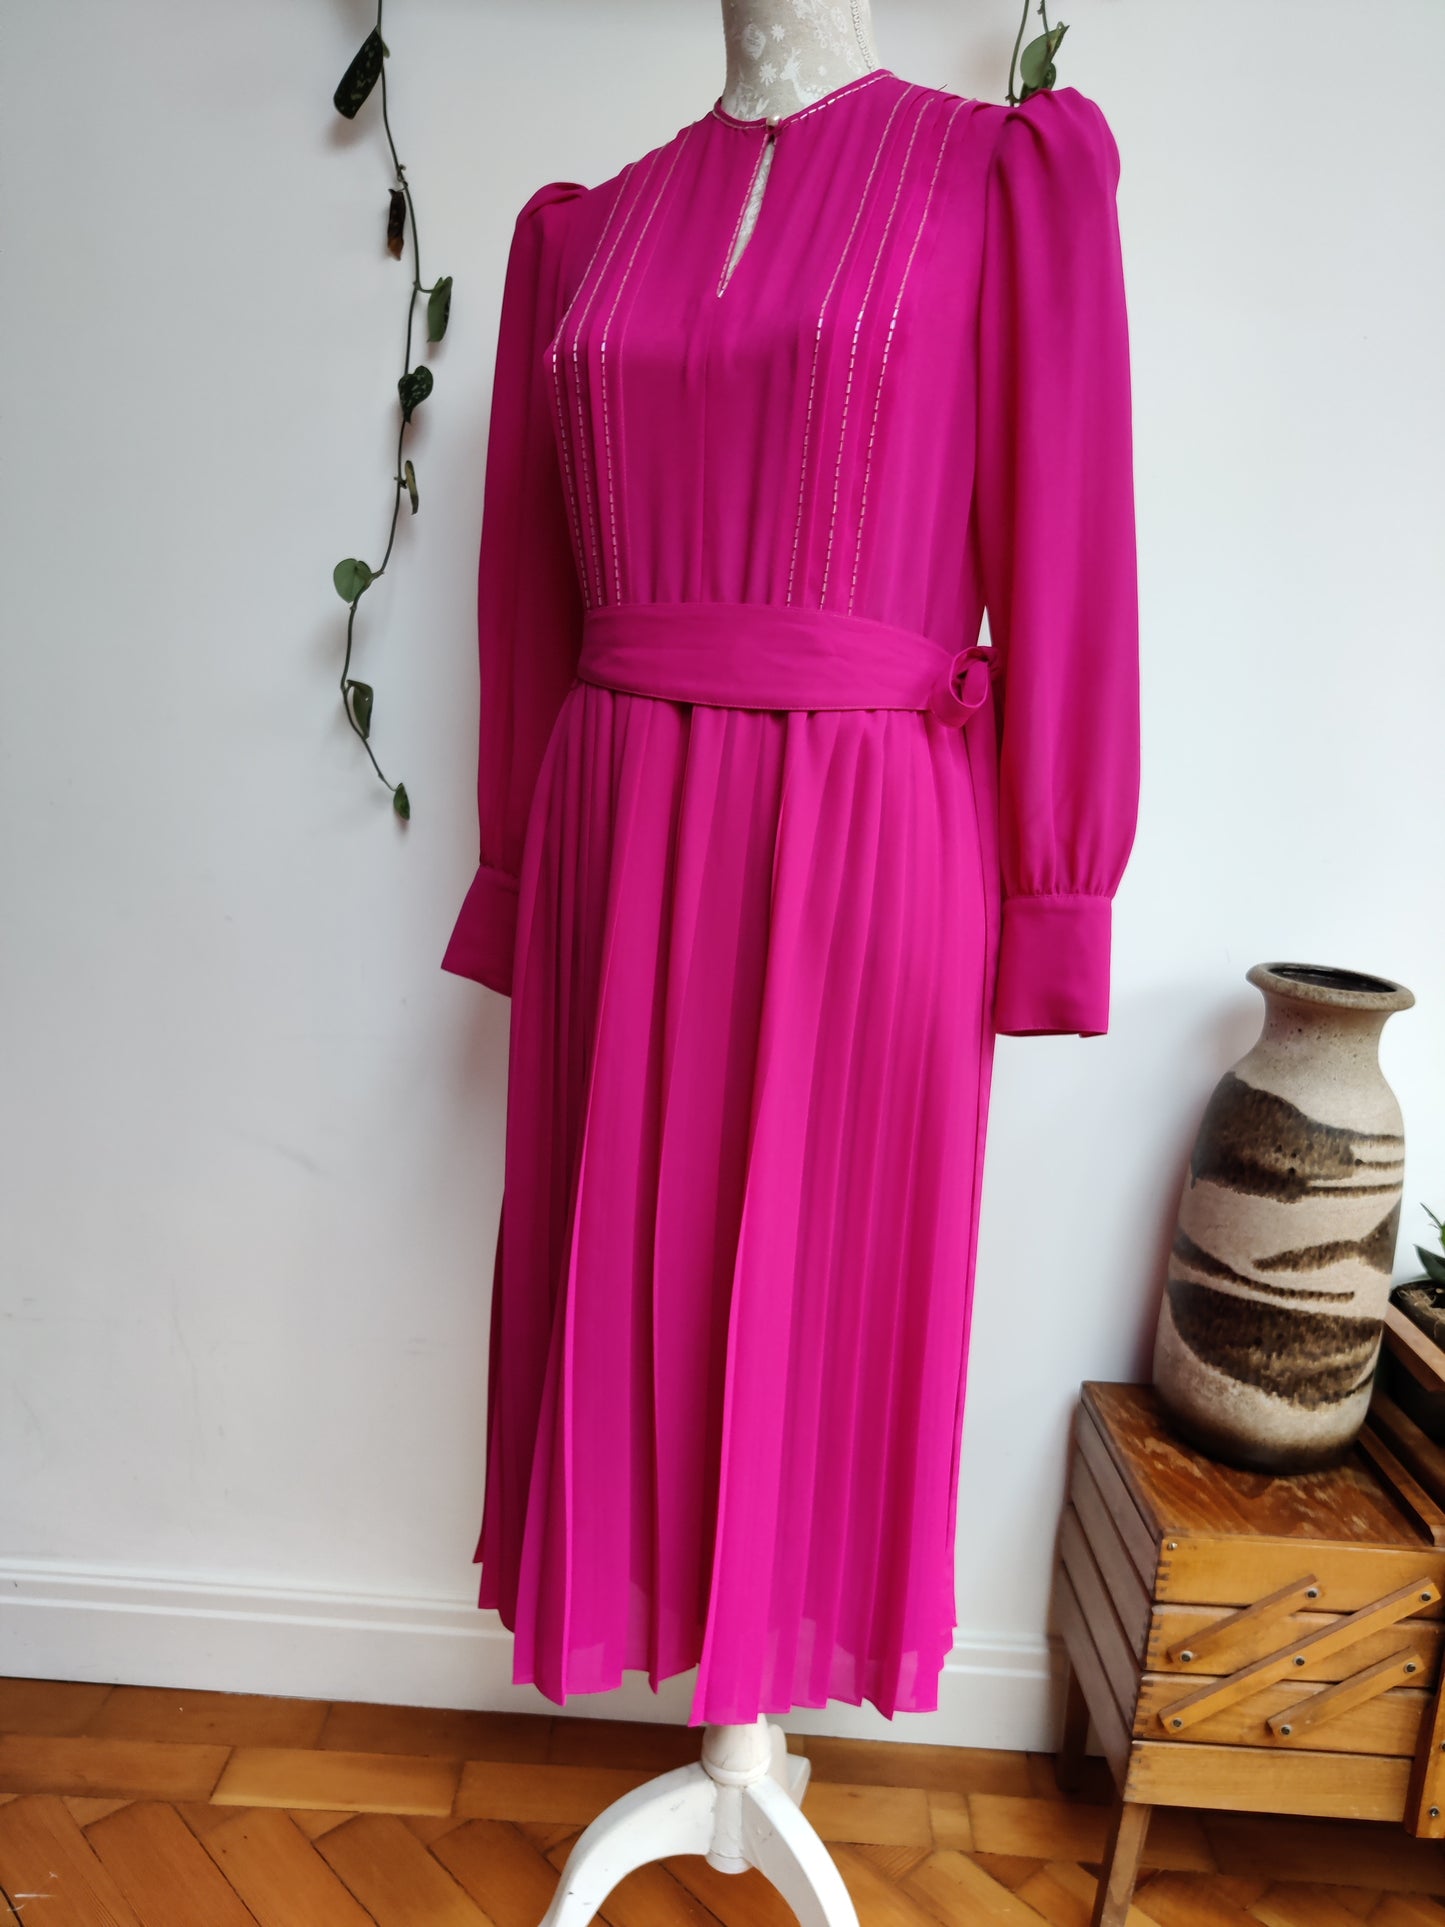 Stunning vintage 80s pink pleated dress with bead detail and belt. Size 10-12.